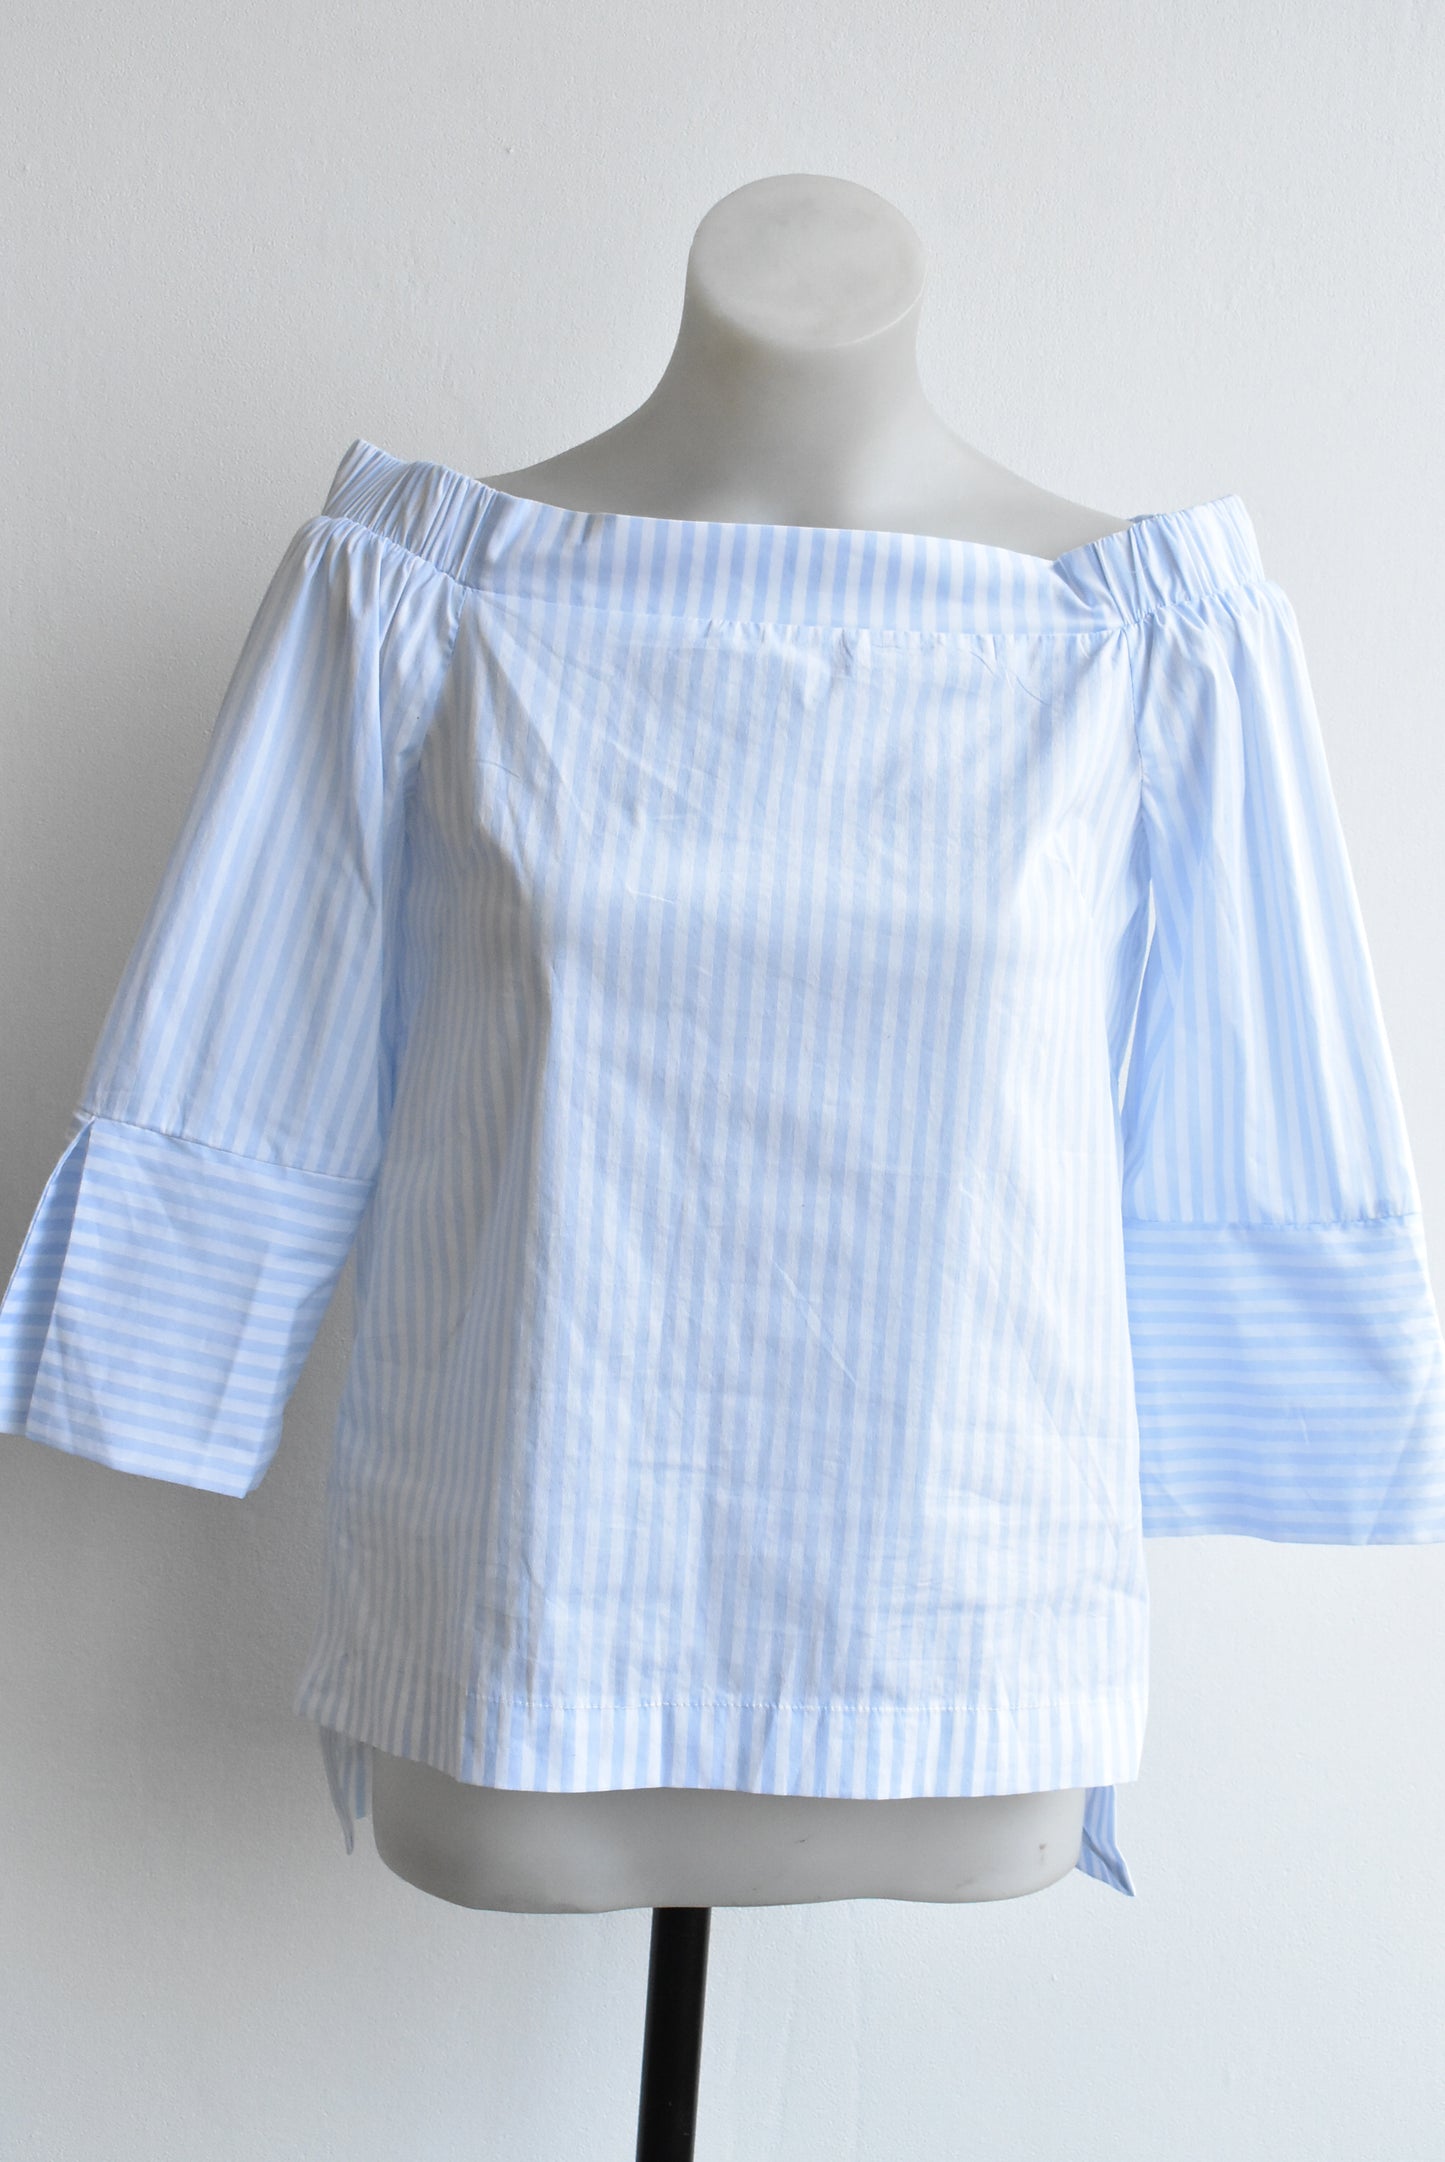 Closet London new blue-and-white striped off-the-shoulder top, size 8